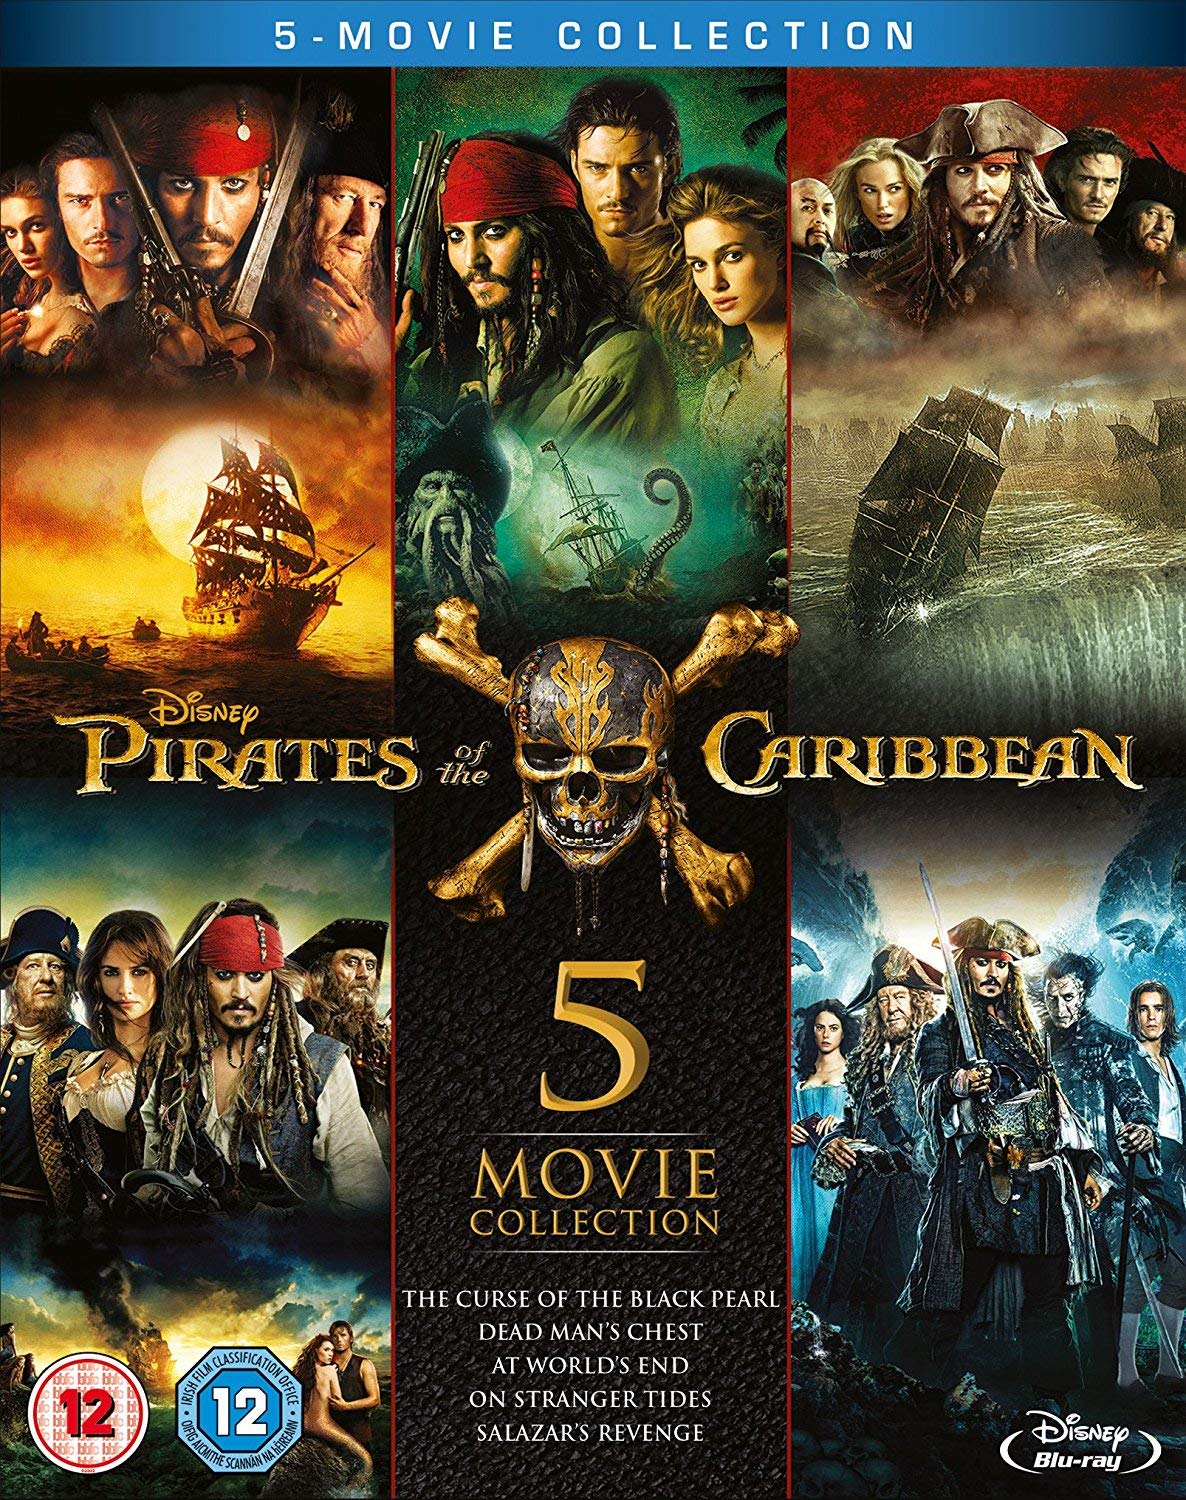 Pirates of the Caribbean: 5-Movie Collection (Blu-ray) $23.12 @ Walmart